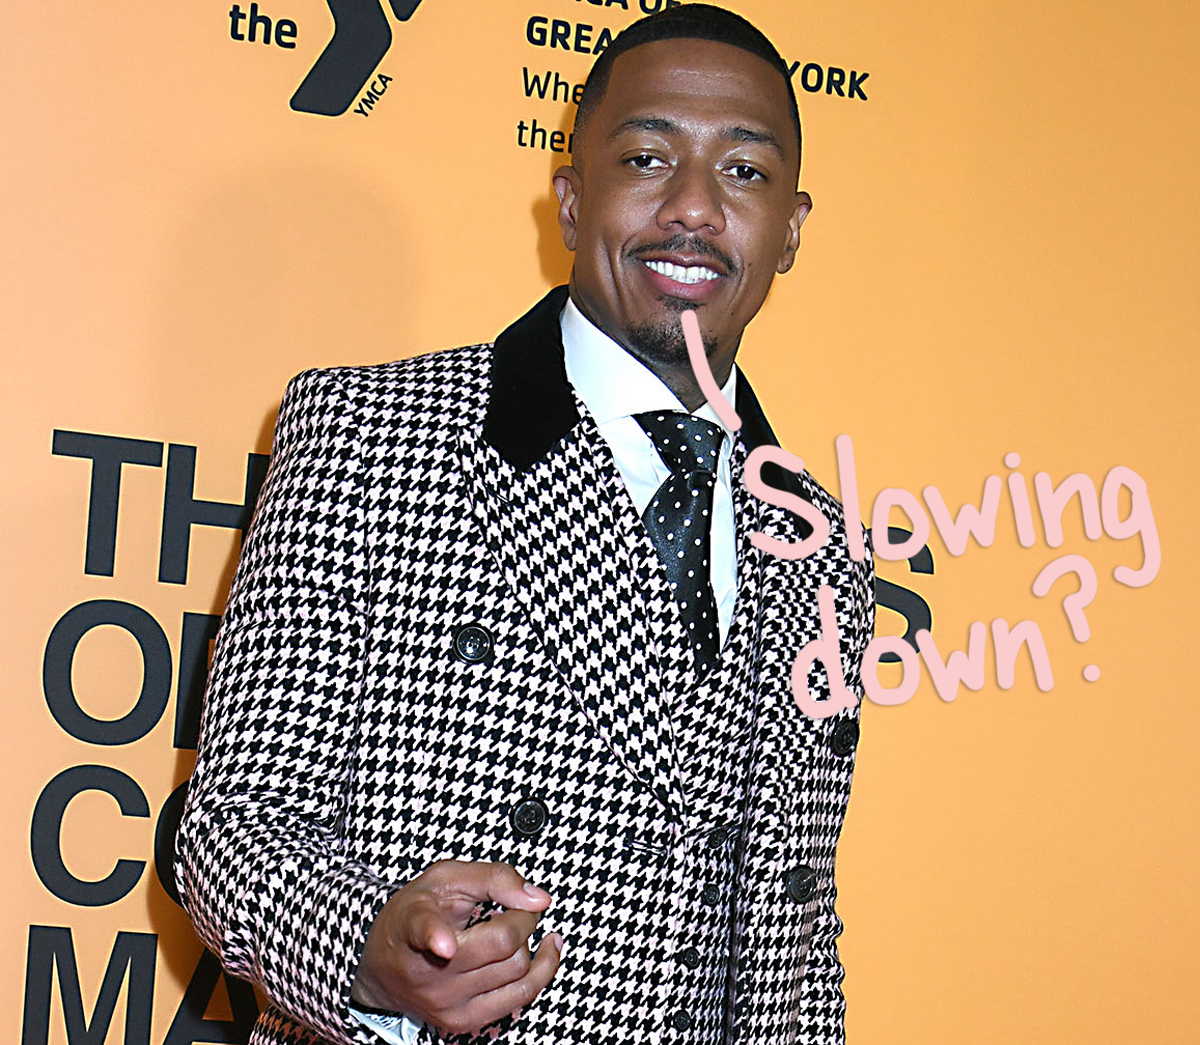 #Thank God! Nick Cannon Says He’s Considering Having A Vasectomy So He Won’t ‘Populate The Earth’!